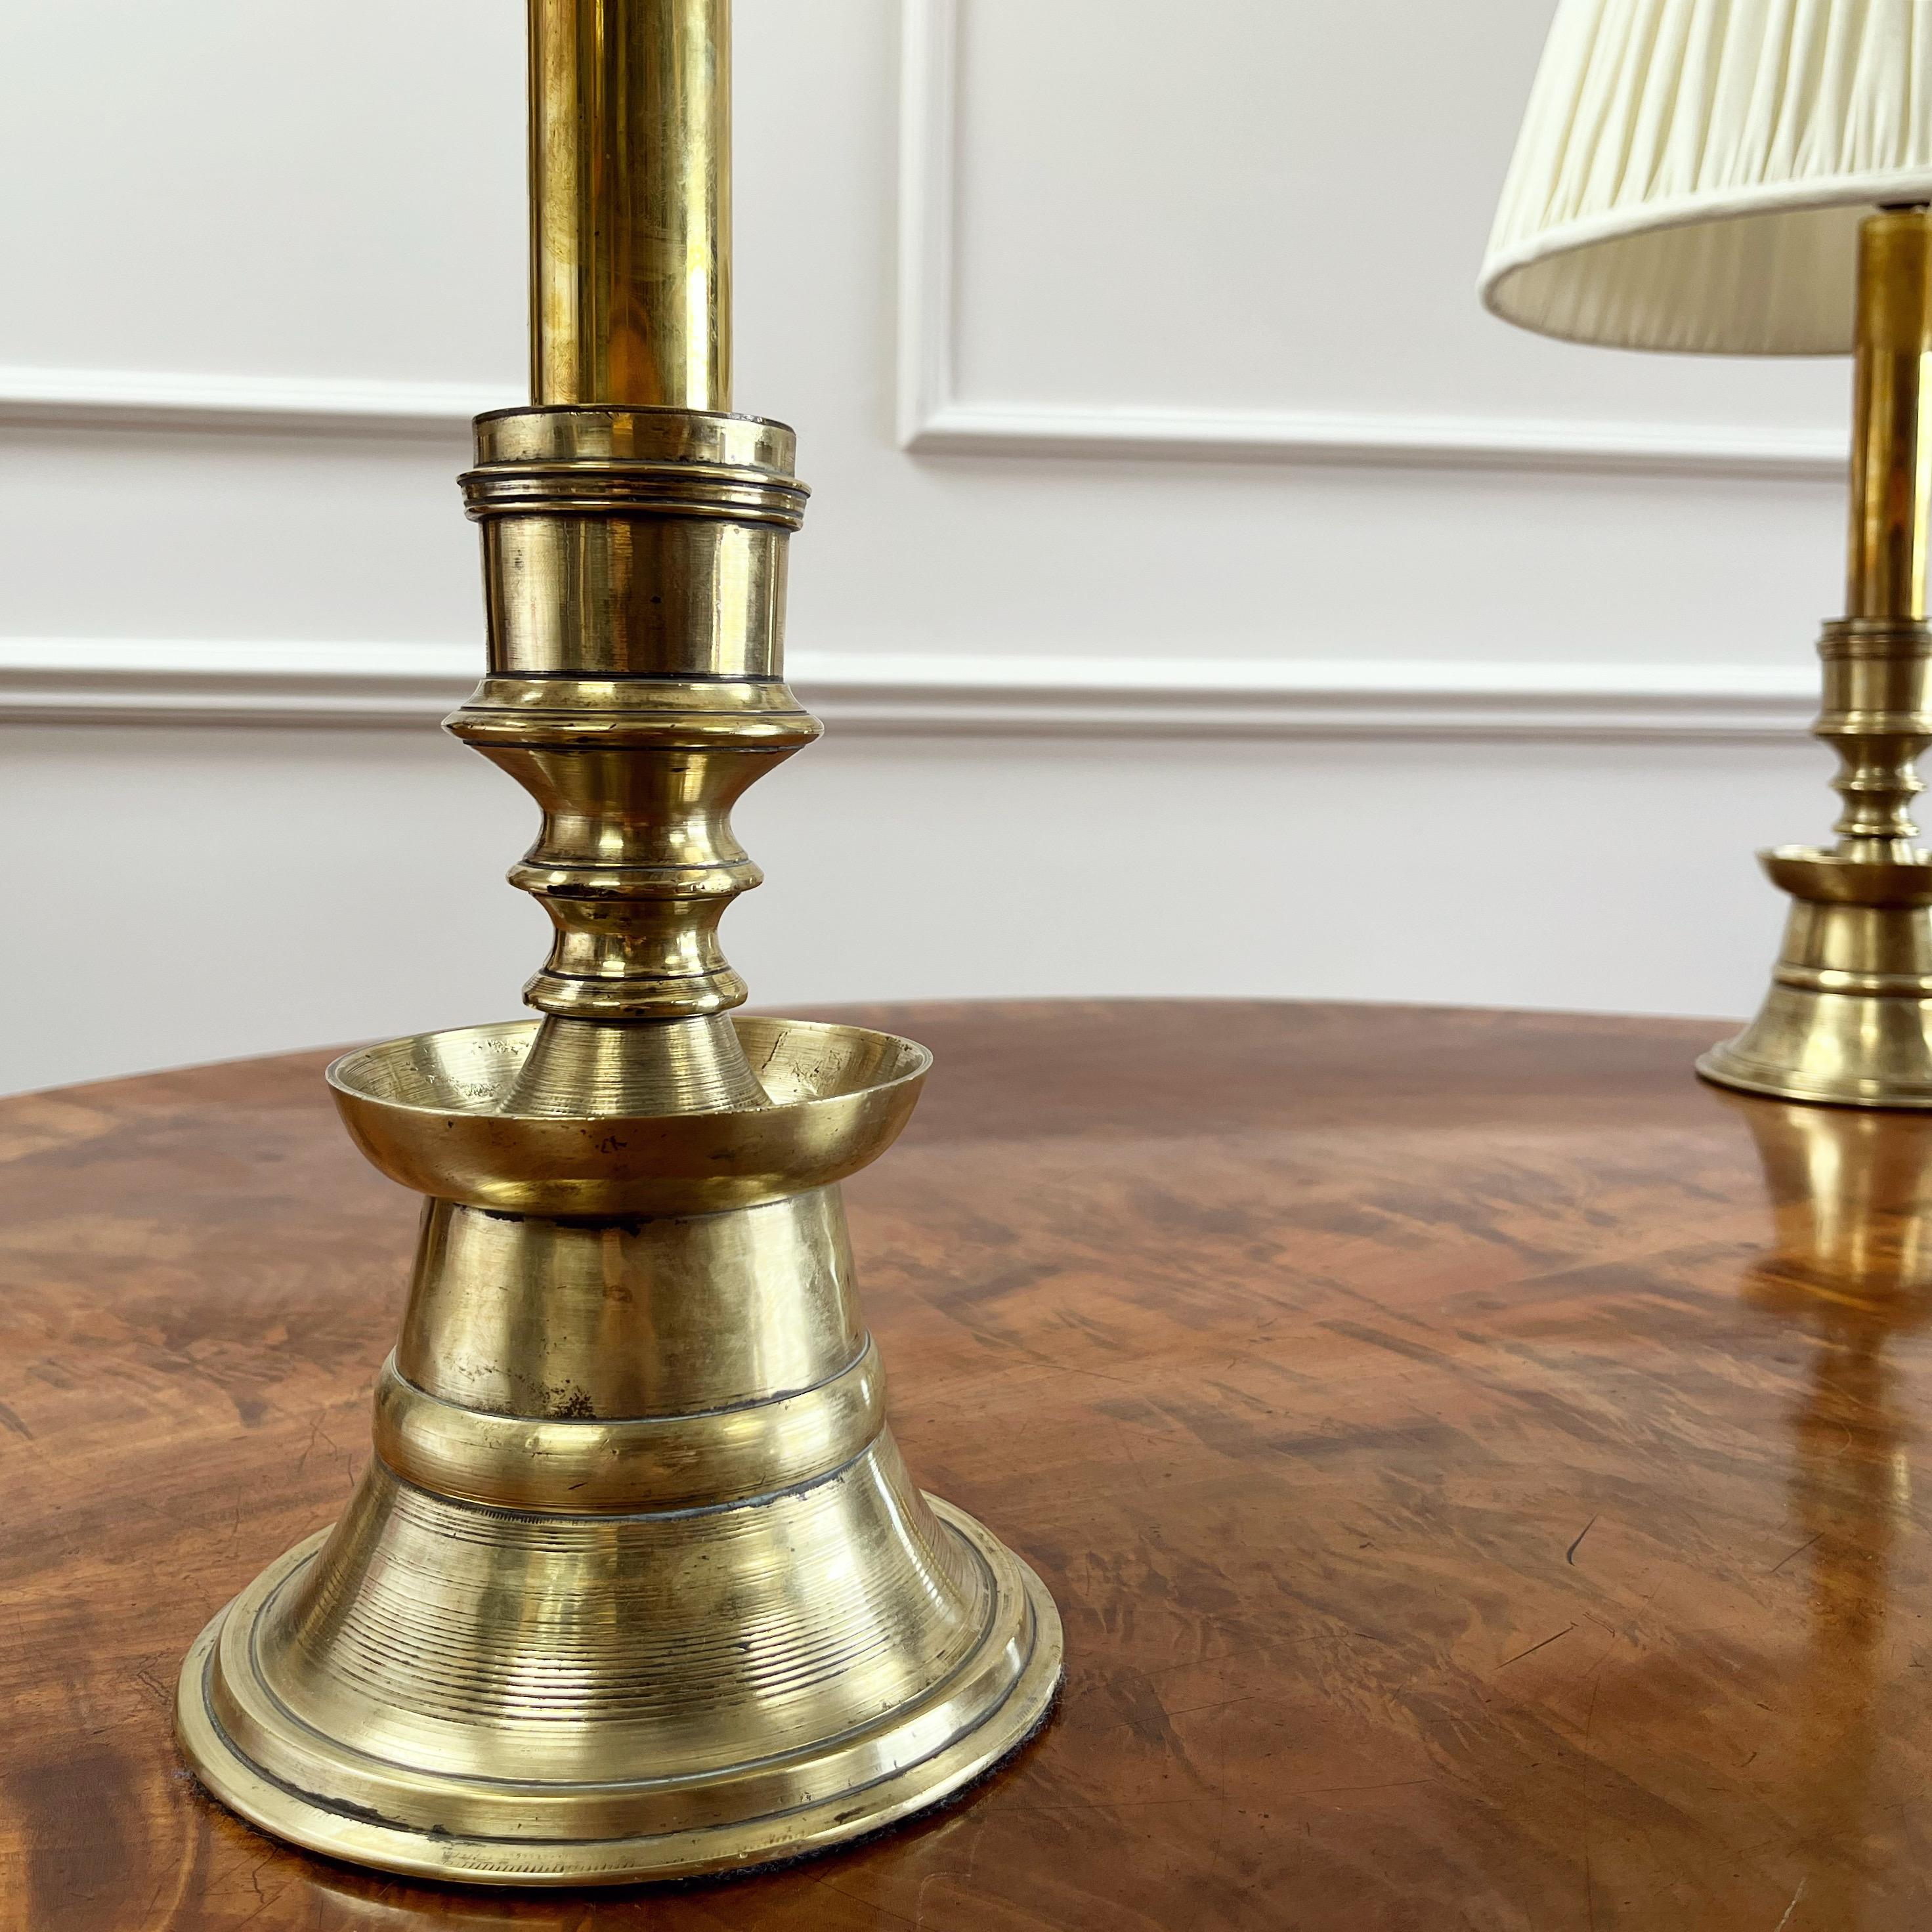 A pair of heavy gauge brass ottoman candlesticks, the lower section with flaring banded skirt narrowing to the waist and flaring out to the circular section rim, the upper section with tubular neck and a flaring banded truncated conical mouth